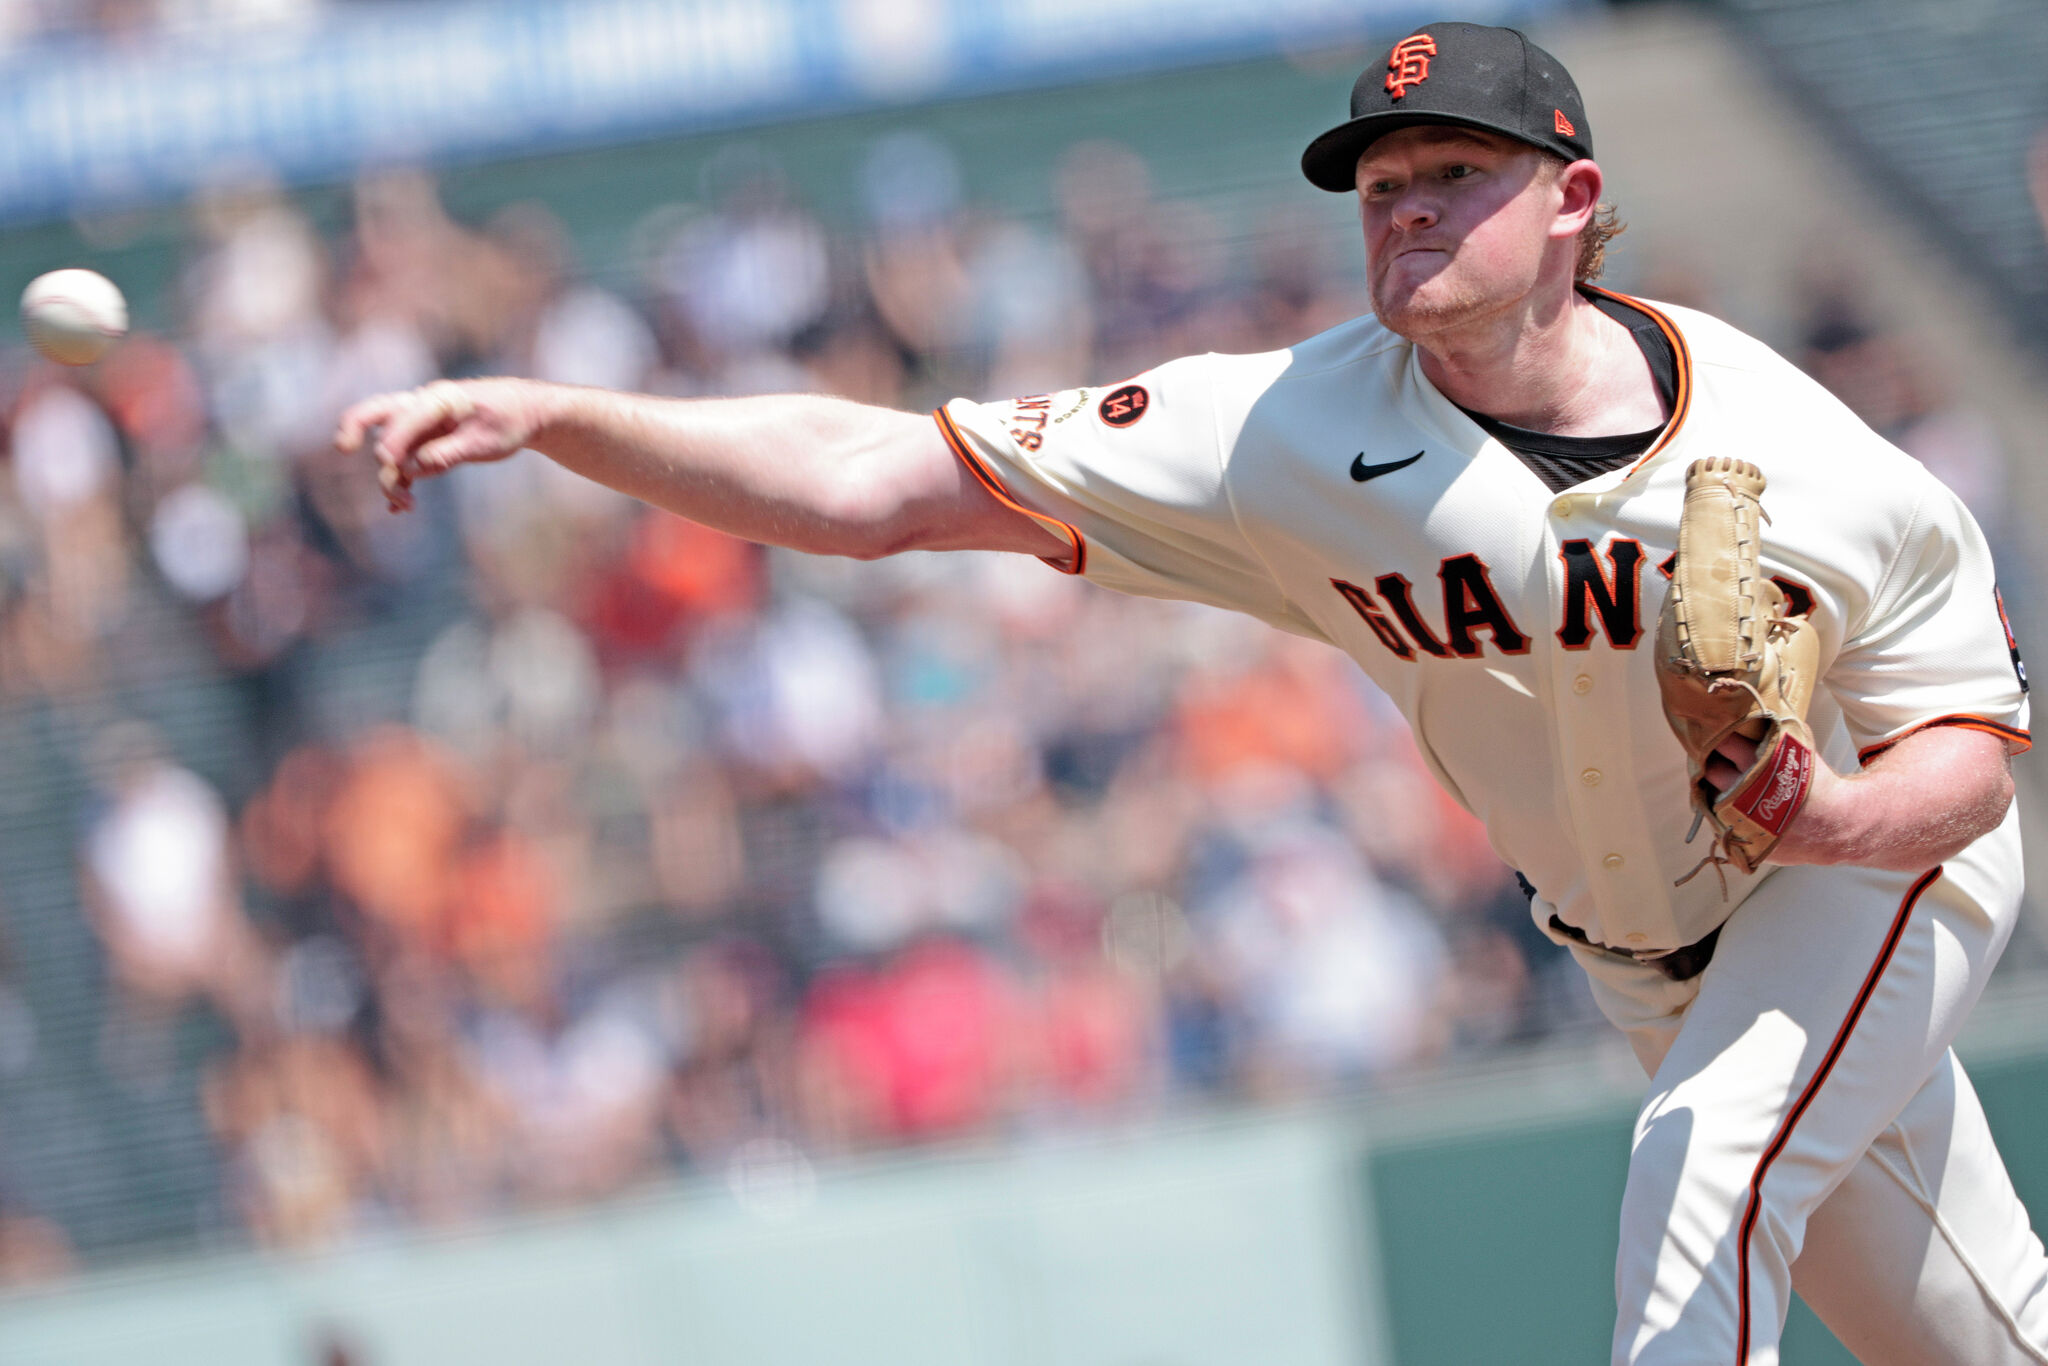 Giants rookie OF Wade Meckler earning his keep after rough MLB intro